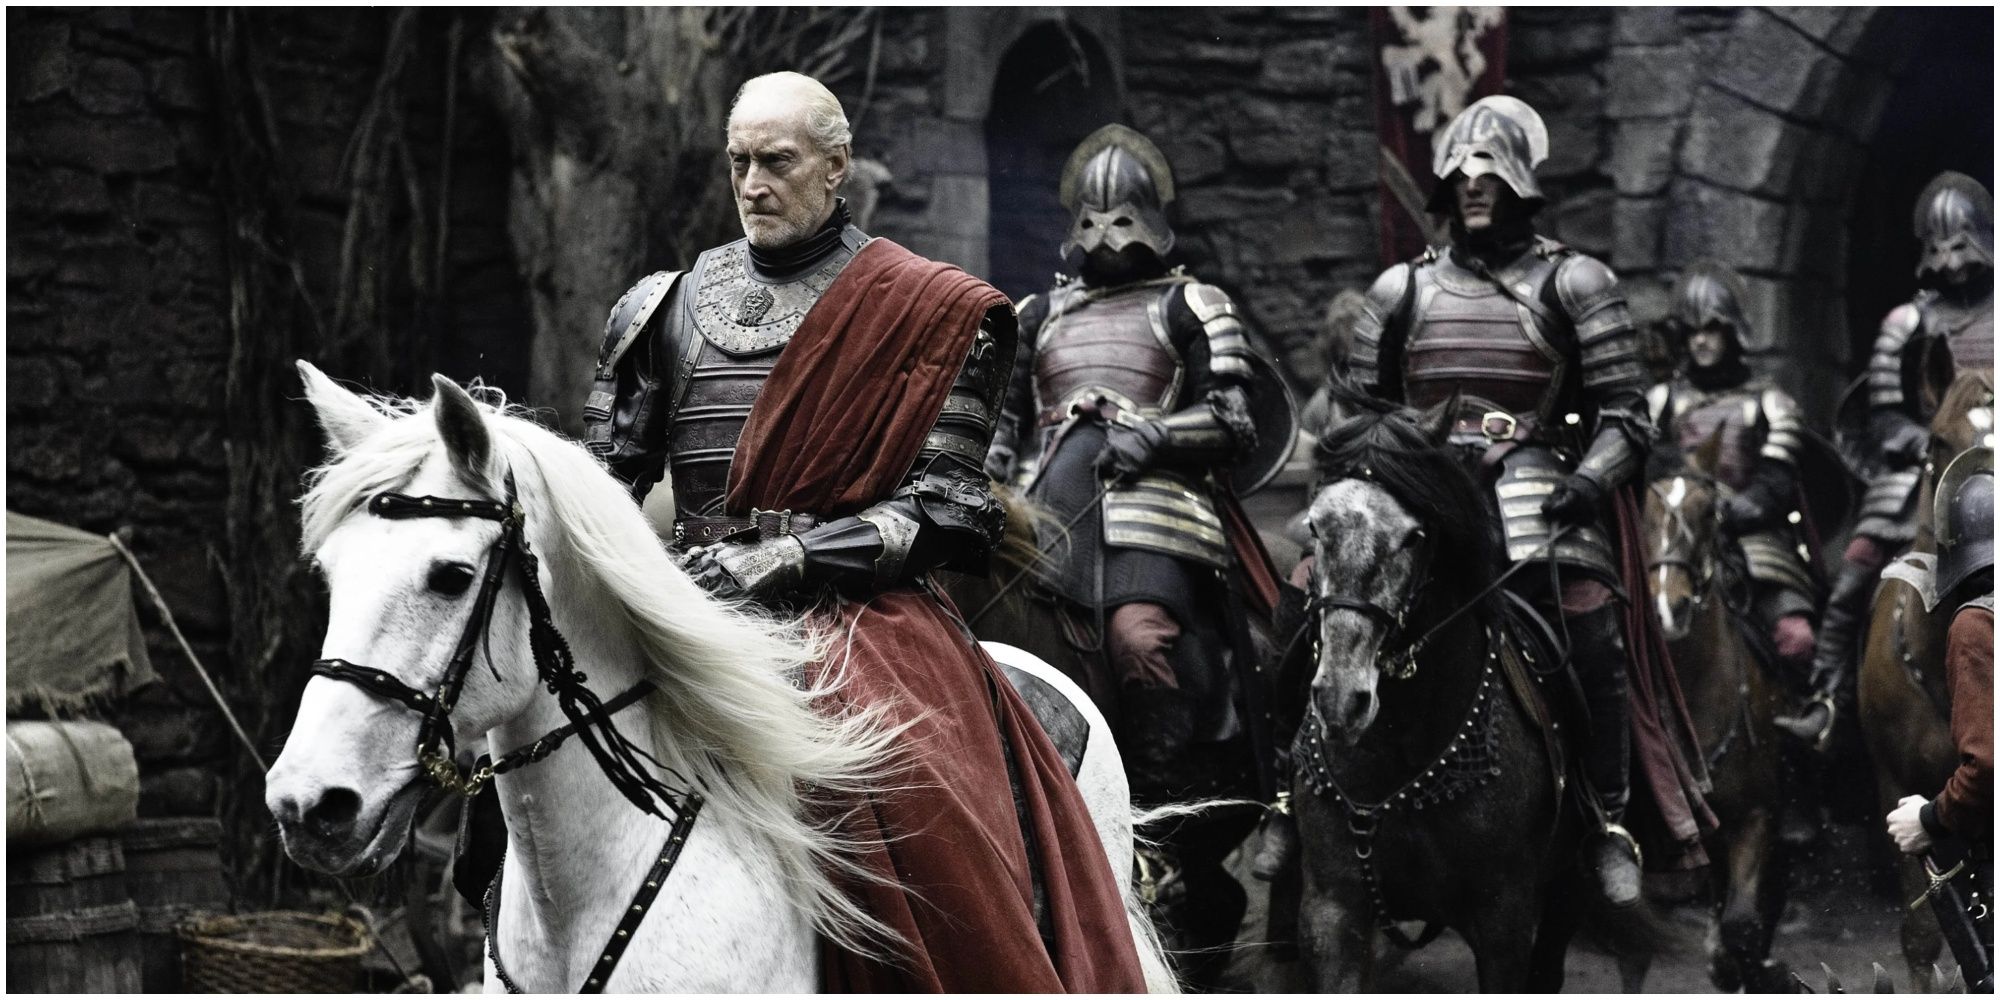 Tywin Lannister at Harrenhal in Game of Thrones.